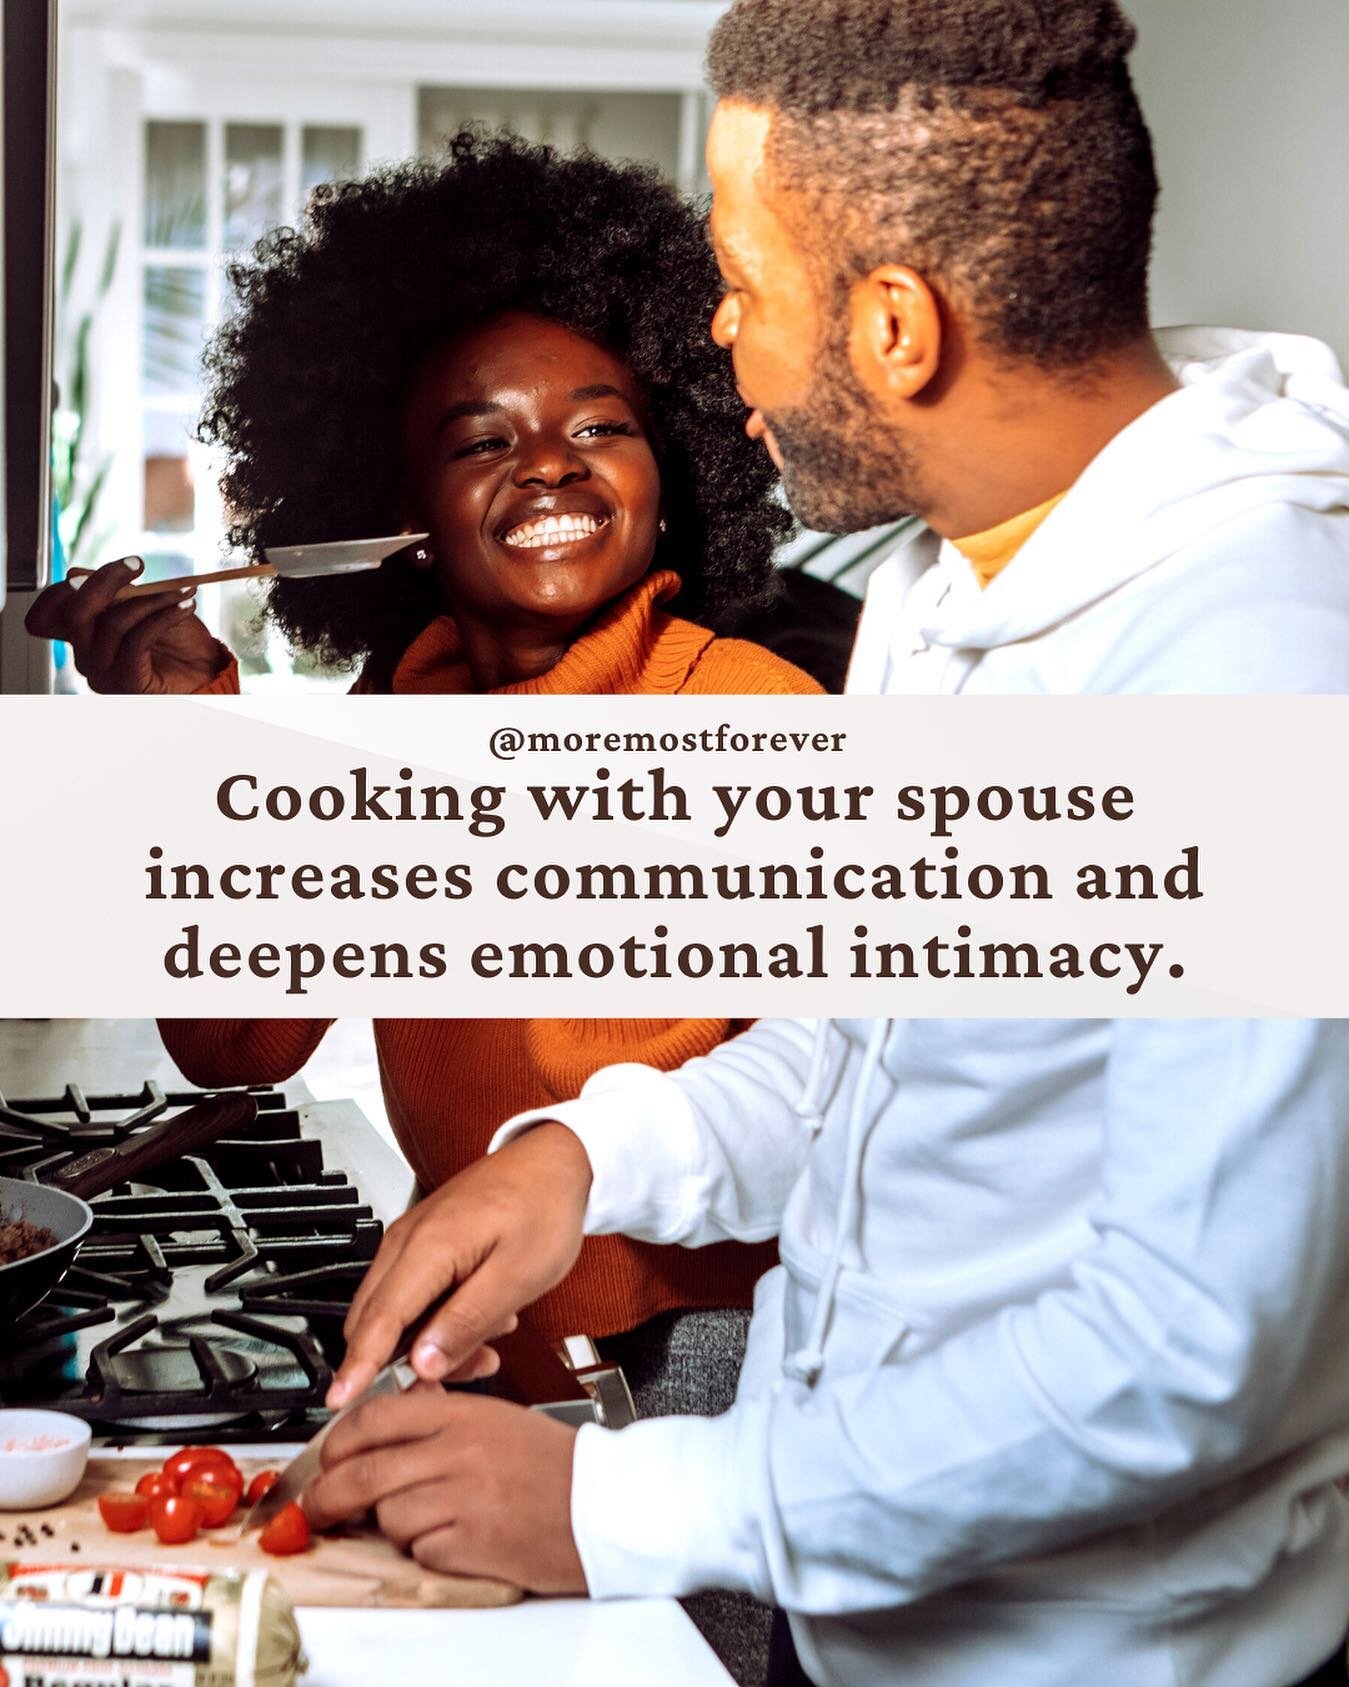 What are you cooking up in your marriage? Date night doesn&rsquo;t have to be expensive or complicated. All you need is dedicated time together. 

#marriagegoals #marriageadvice #marriagetips #marriagetip #marriagecounseling #marriagebootcamp #dateid